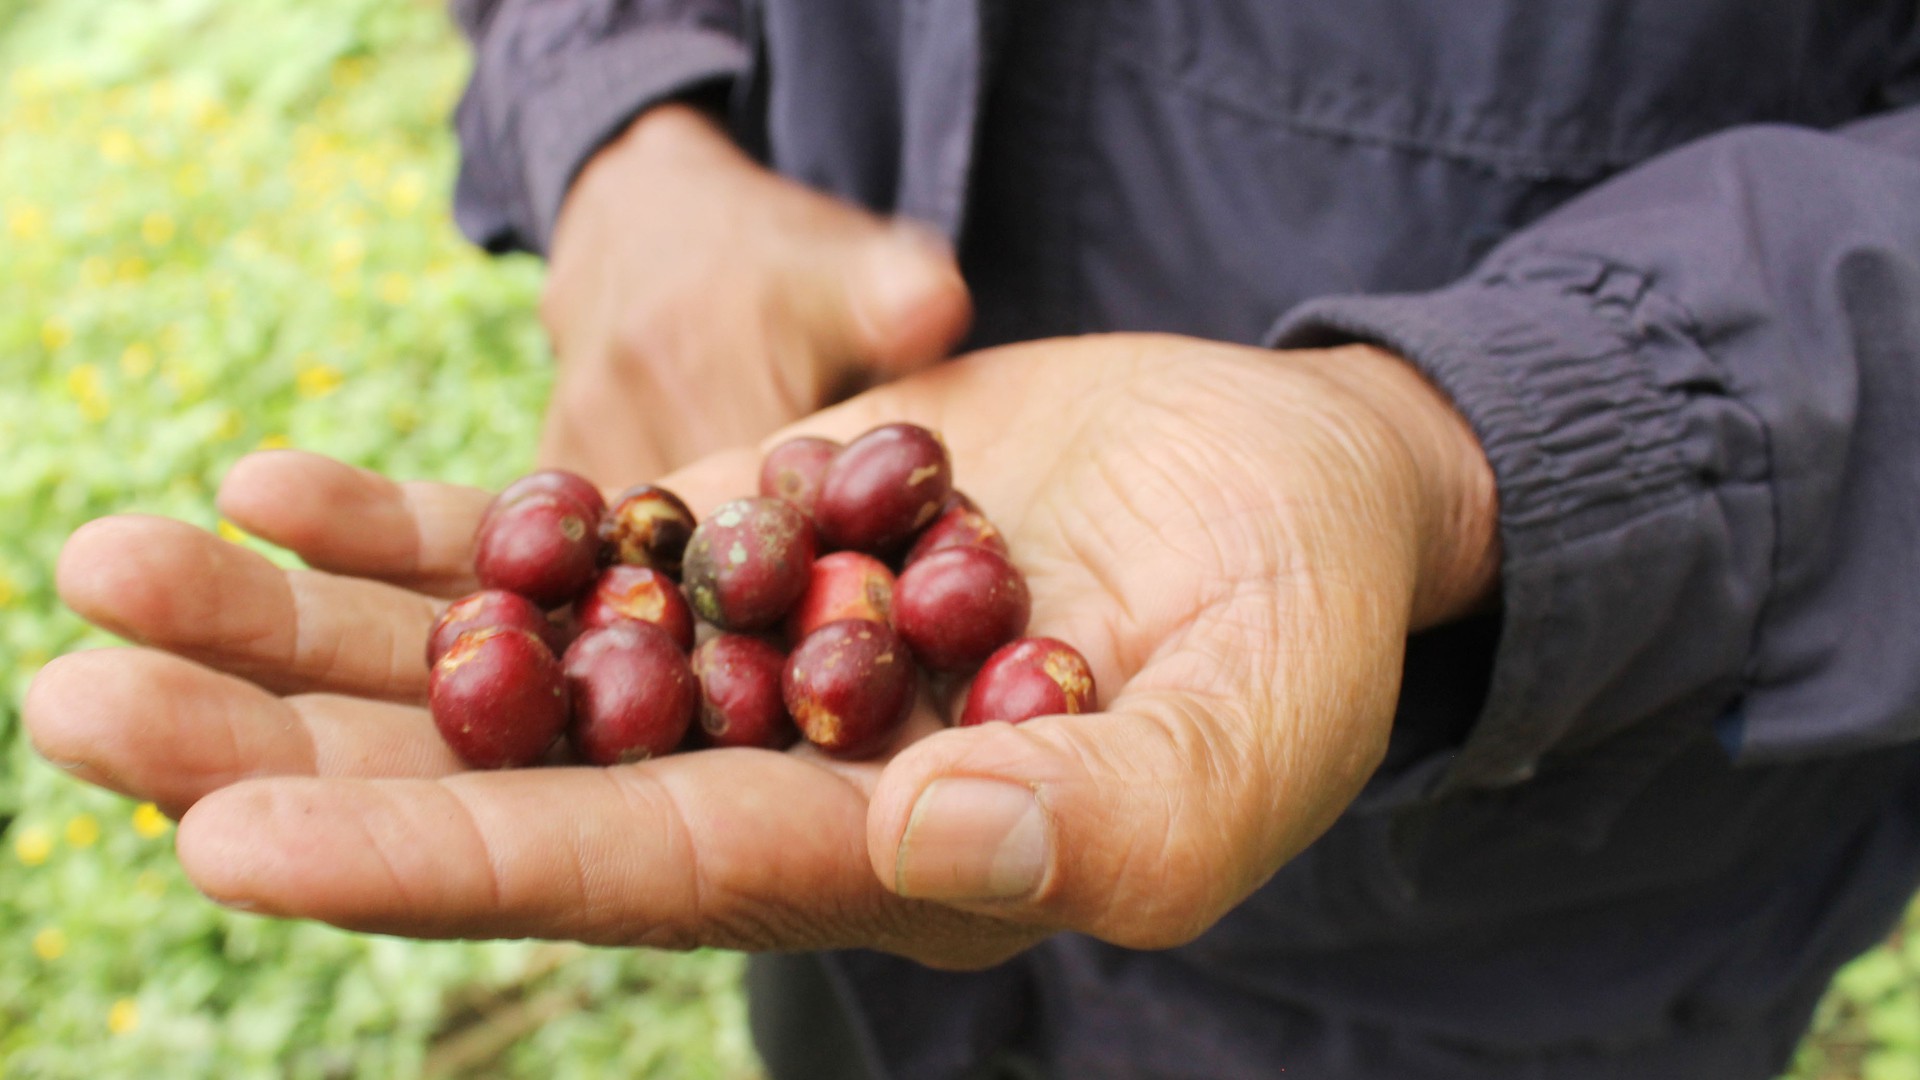 Reynaldo Arias Ruiz, a director of the Maya Vinic coffee cooperative, holds ripened coffee cherries in his hand. The cherries will be laid out to dry and then processed in amill before they are packaged and exported. (Photo by Brittany Elena Morris.)